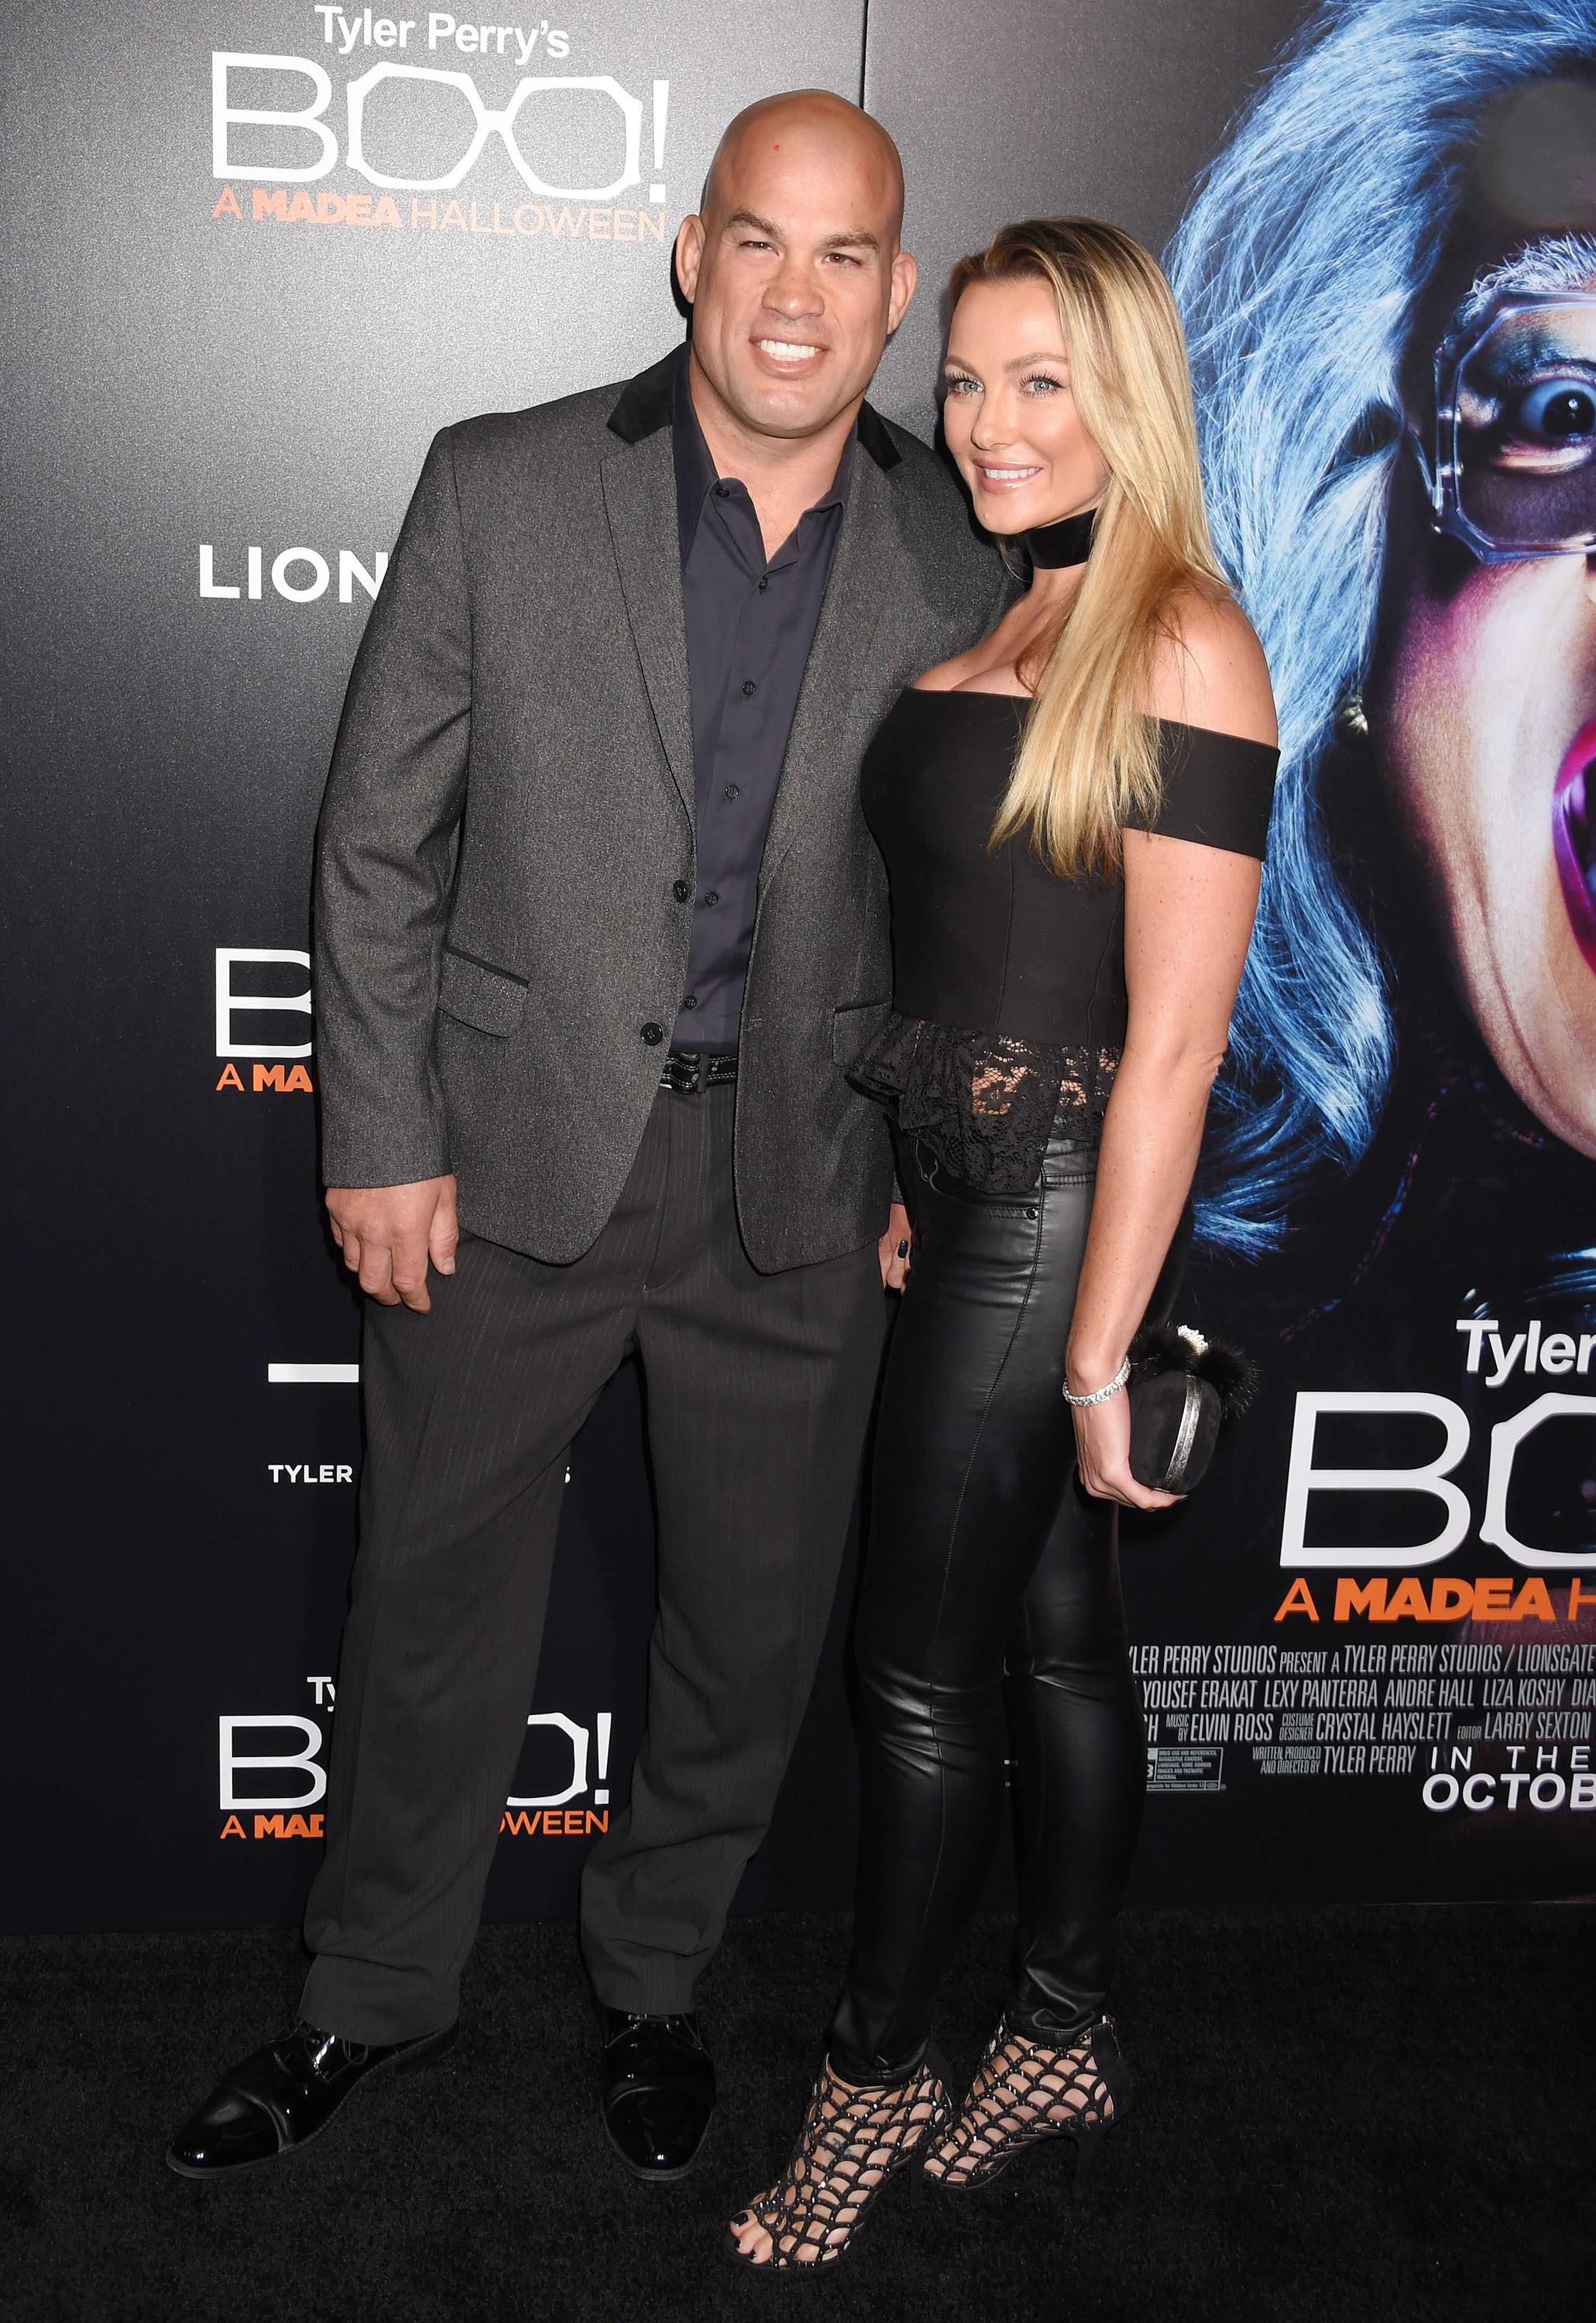 Amber Miller at Tyler Perry Boo A Madea Halloween premiere